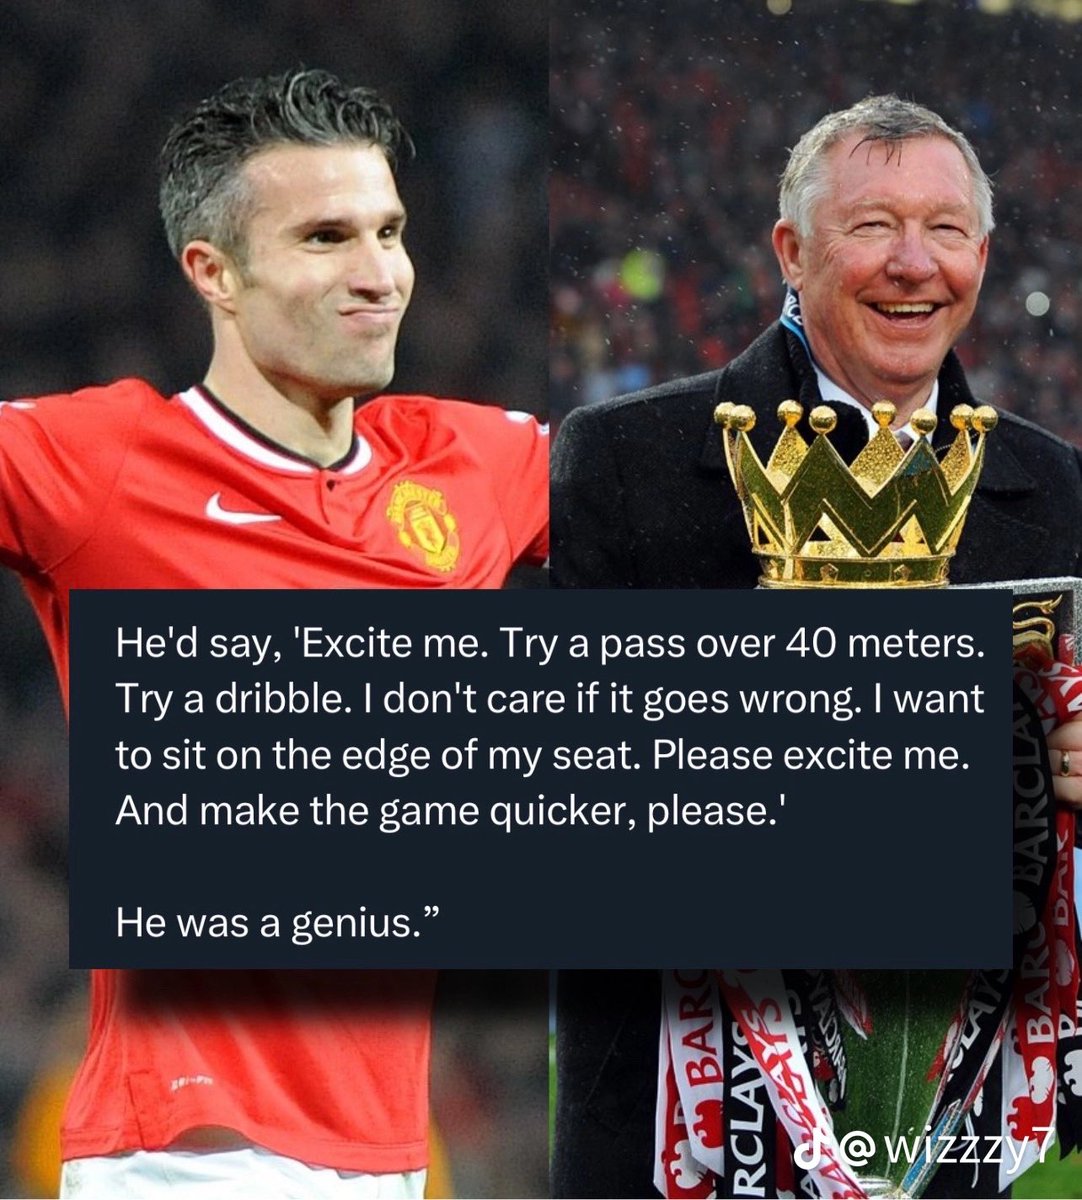 Robin Van Persie on what it was like to be coached by Sir Alex Ferguson👇 🗣️”Fergie made you want to express yourself. He’d say ‘Excite me, try a pass over 40 yards, try a dribble, I don’t care if it goes wrong. I want to sit on the edge of my seat. Please excite me’.”